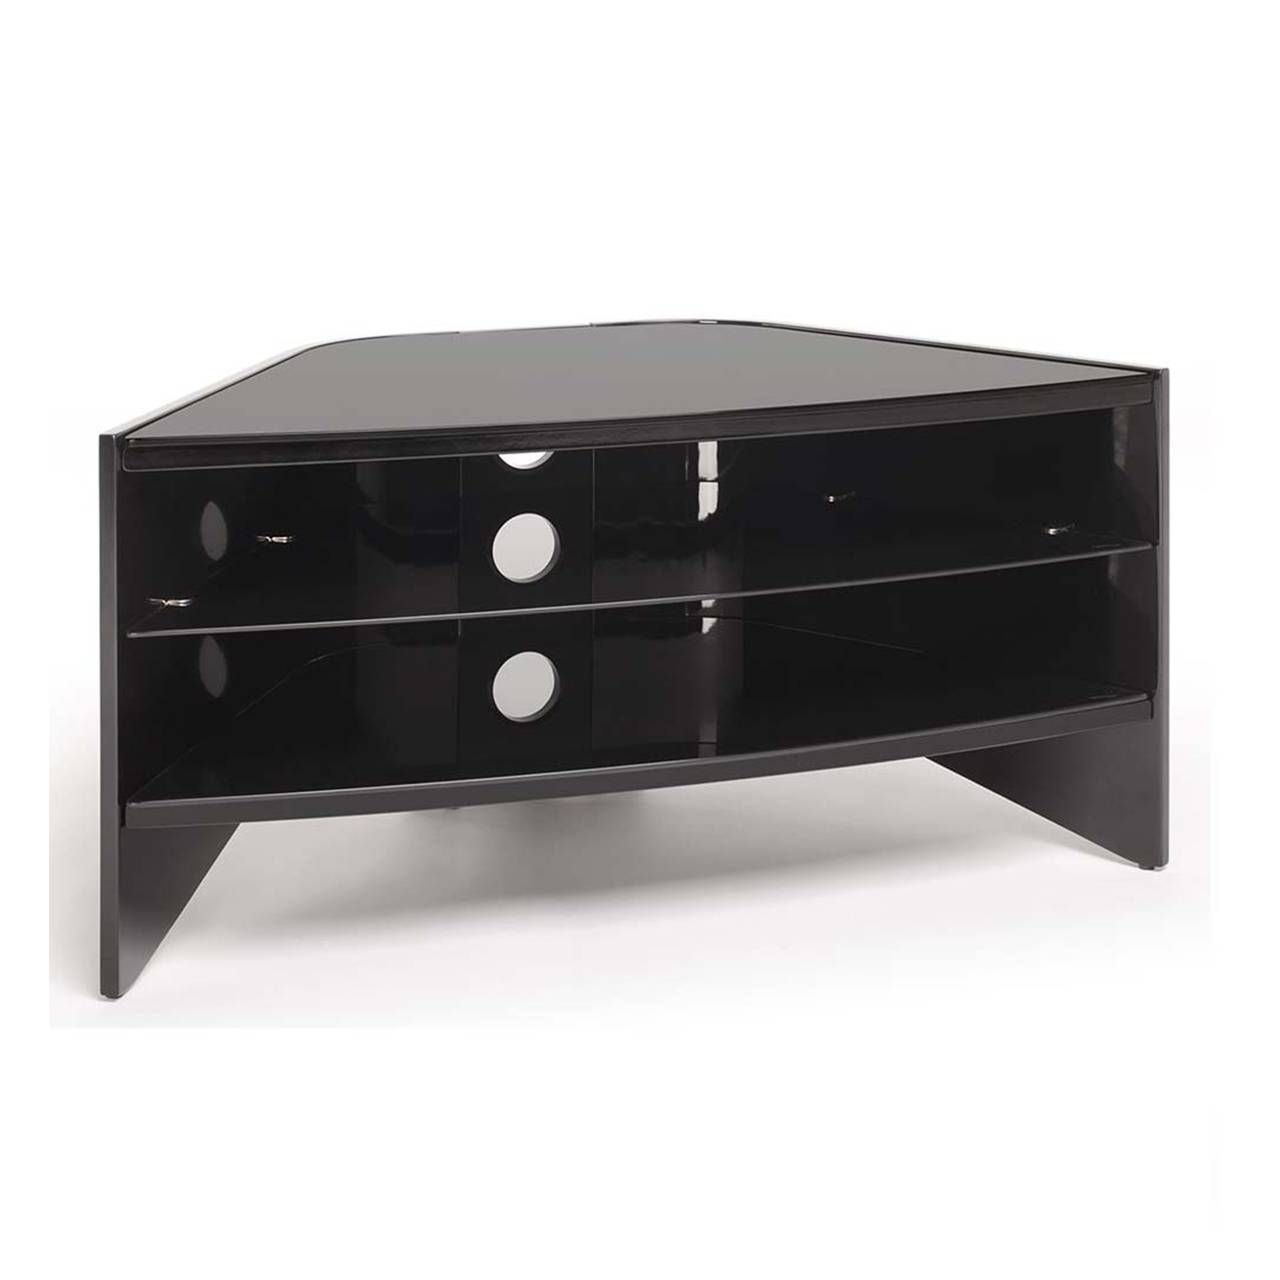 Buy Techlink Riva Rv100b,tv Stand For Screens Up To 50" | Soundstore With Techlink Tv Stands (View 14 of 15)